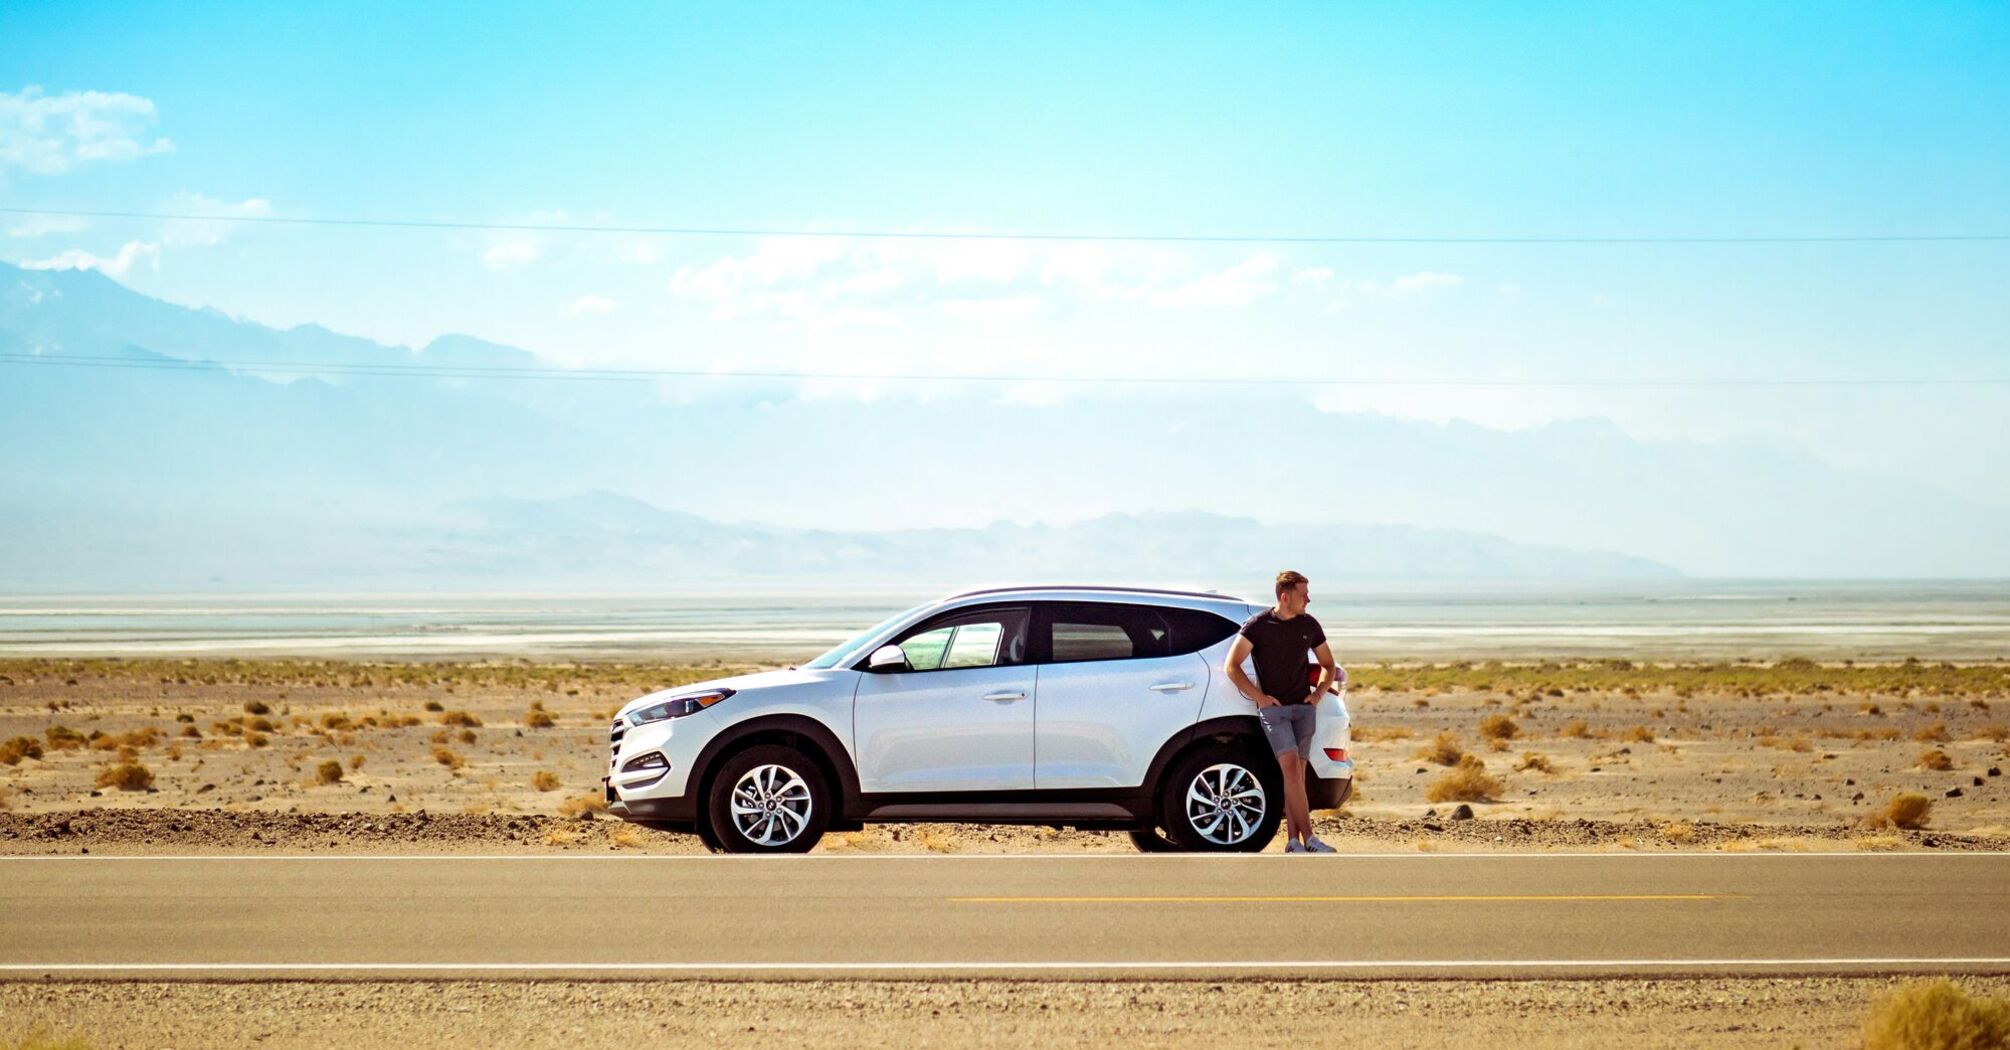 Man standing beside white suv near concrete road under blue sky at daytime